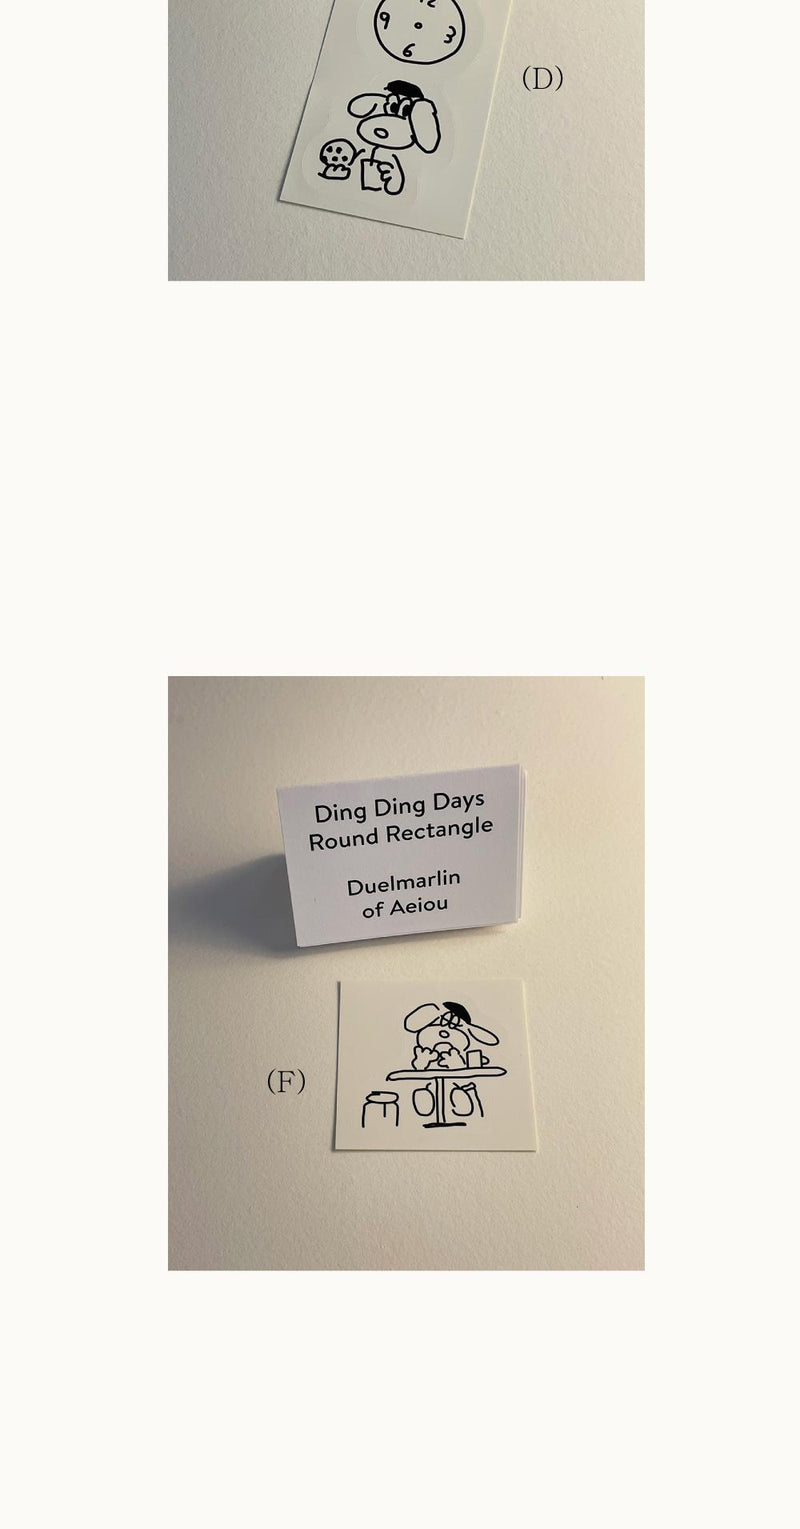 [ROOM 618] Ding Ding Days ステッカー／Round Rectangle 6枚セット